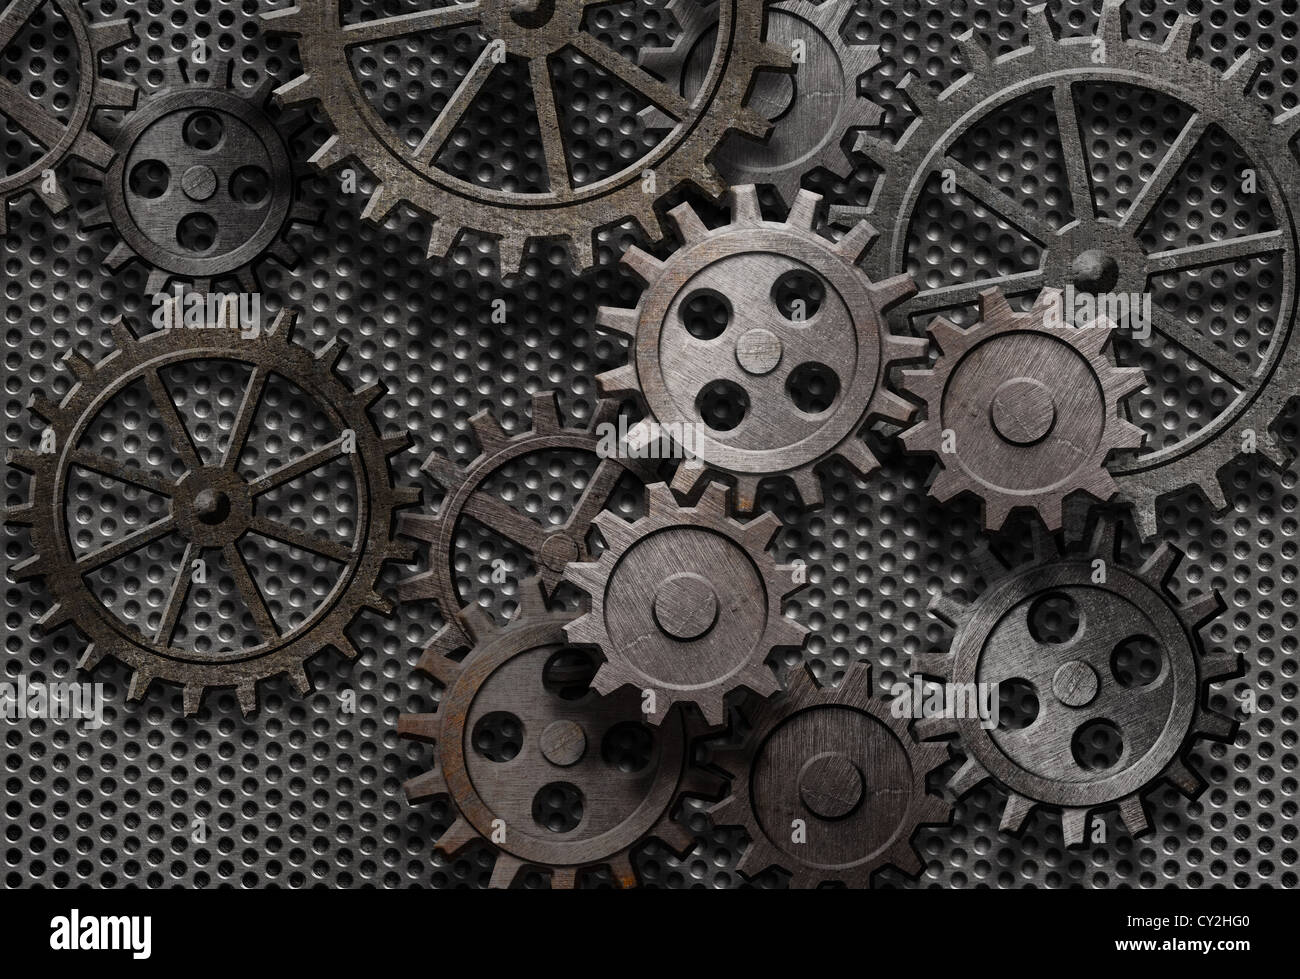 Abstract Rusty Gears Old Machine Parts Stock Photo Alamy